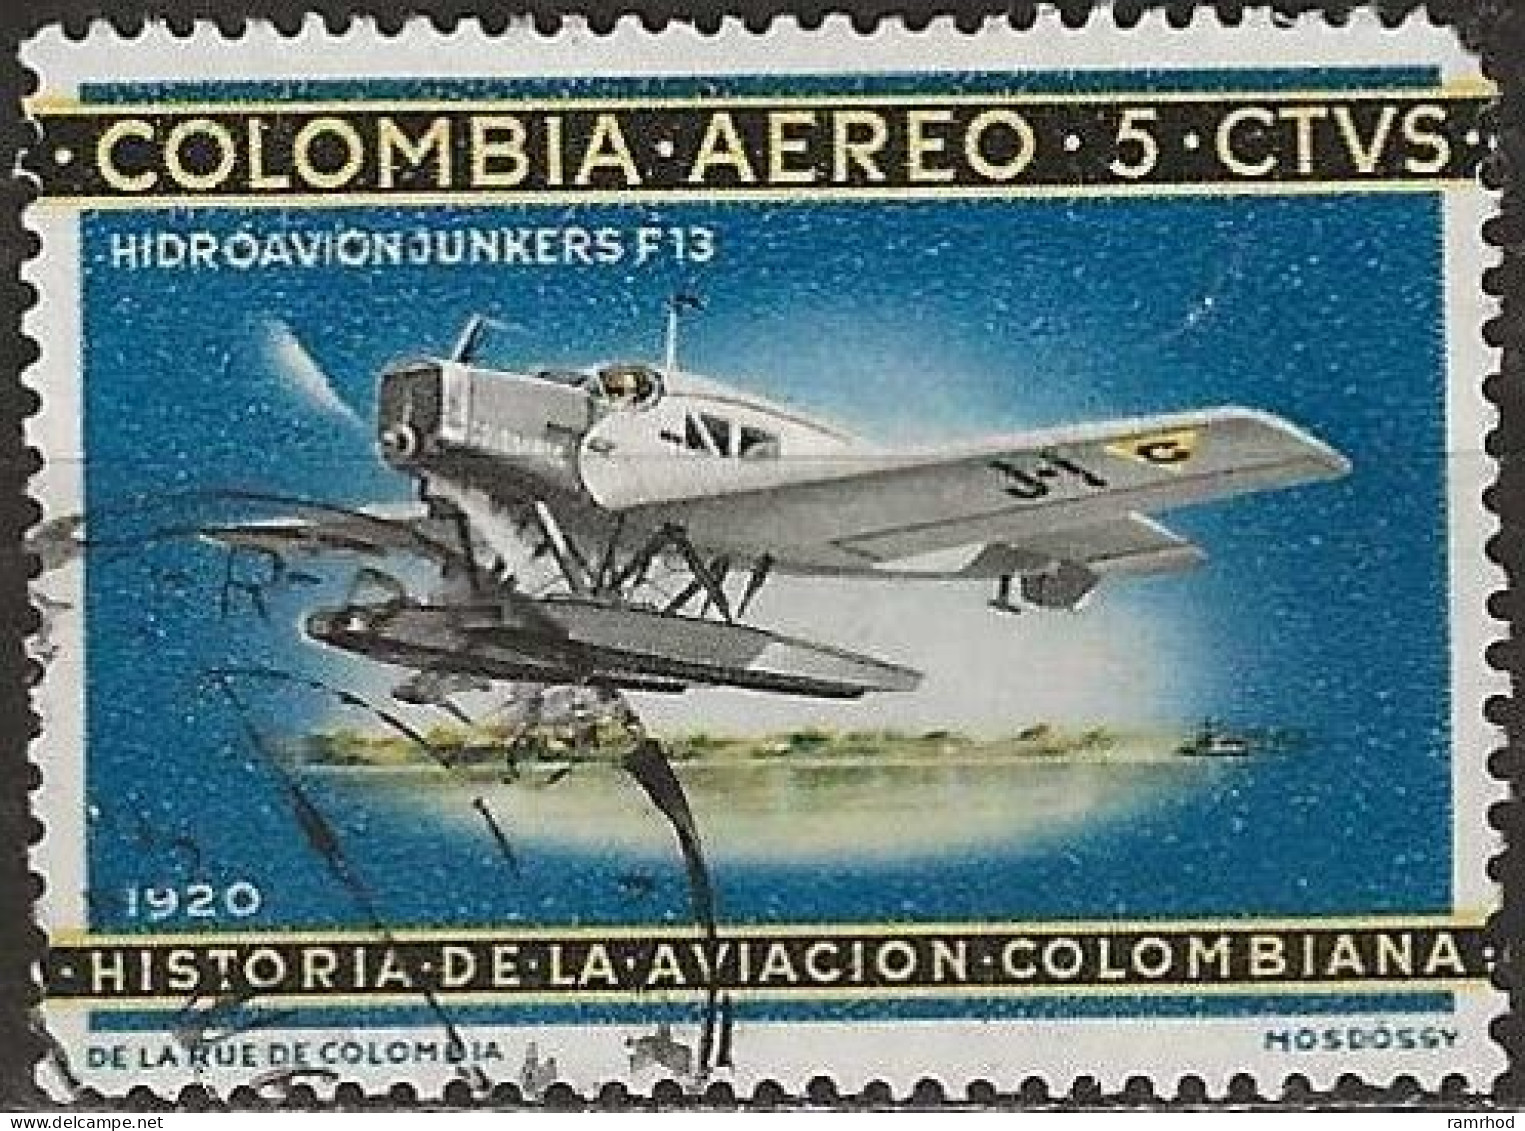 COLOMBIA 1965 Air. History Of Colombian Aviation - 5c Junkers F-13 Seaplane Colombia (1920) FU - Colombia